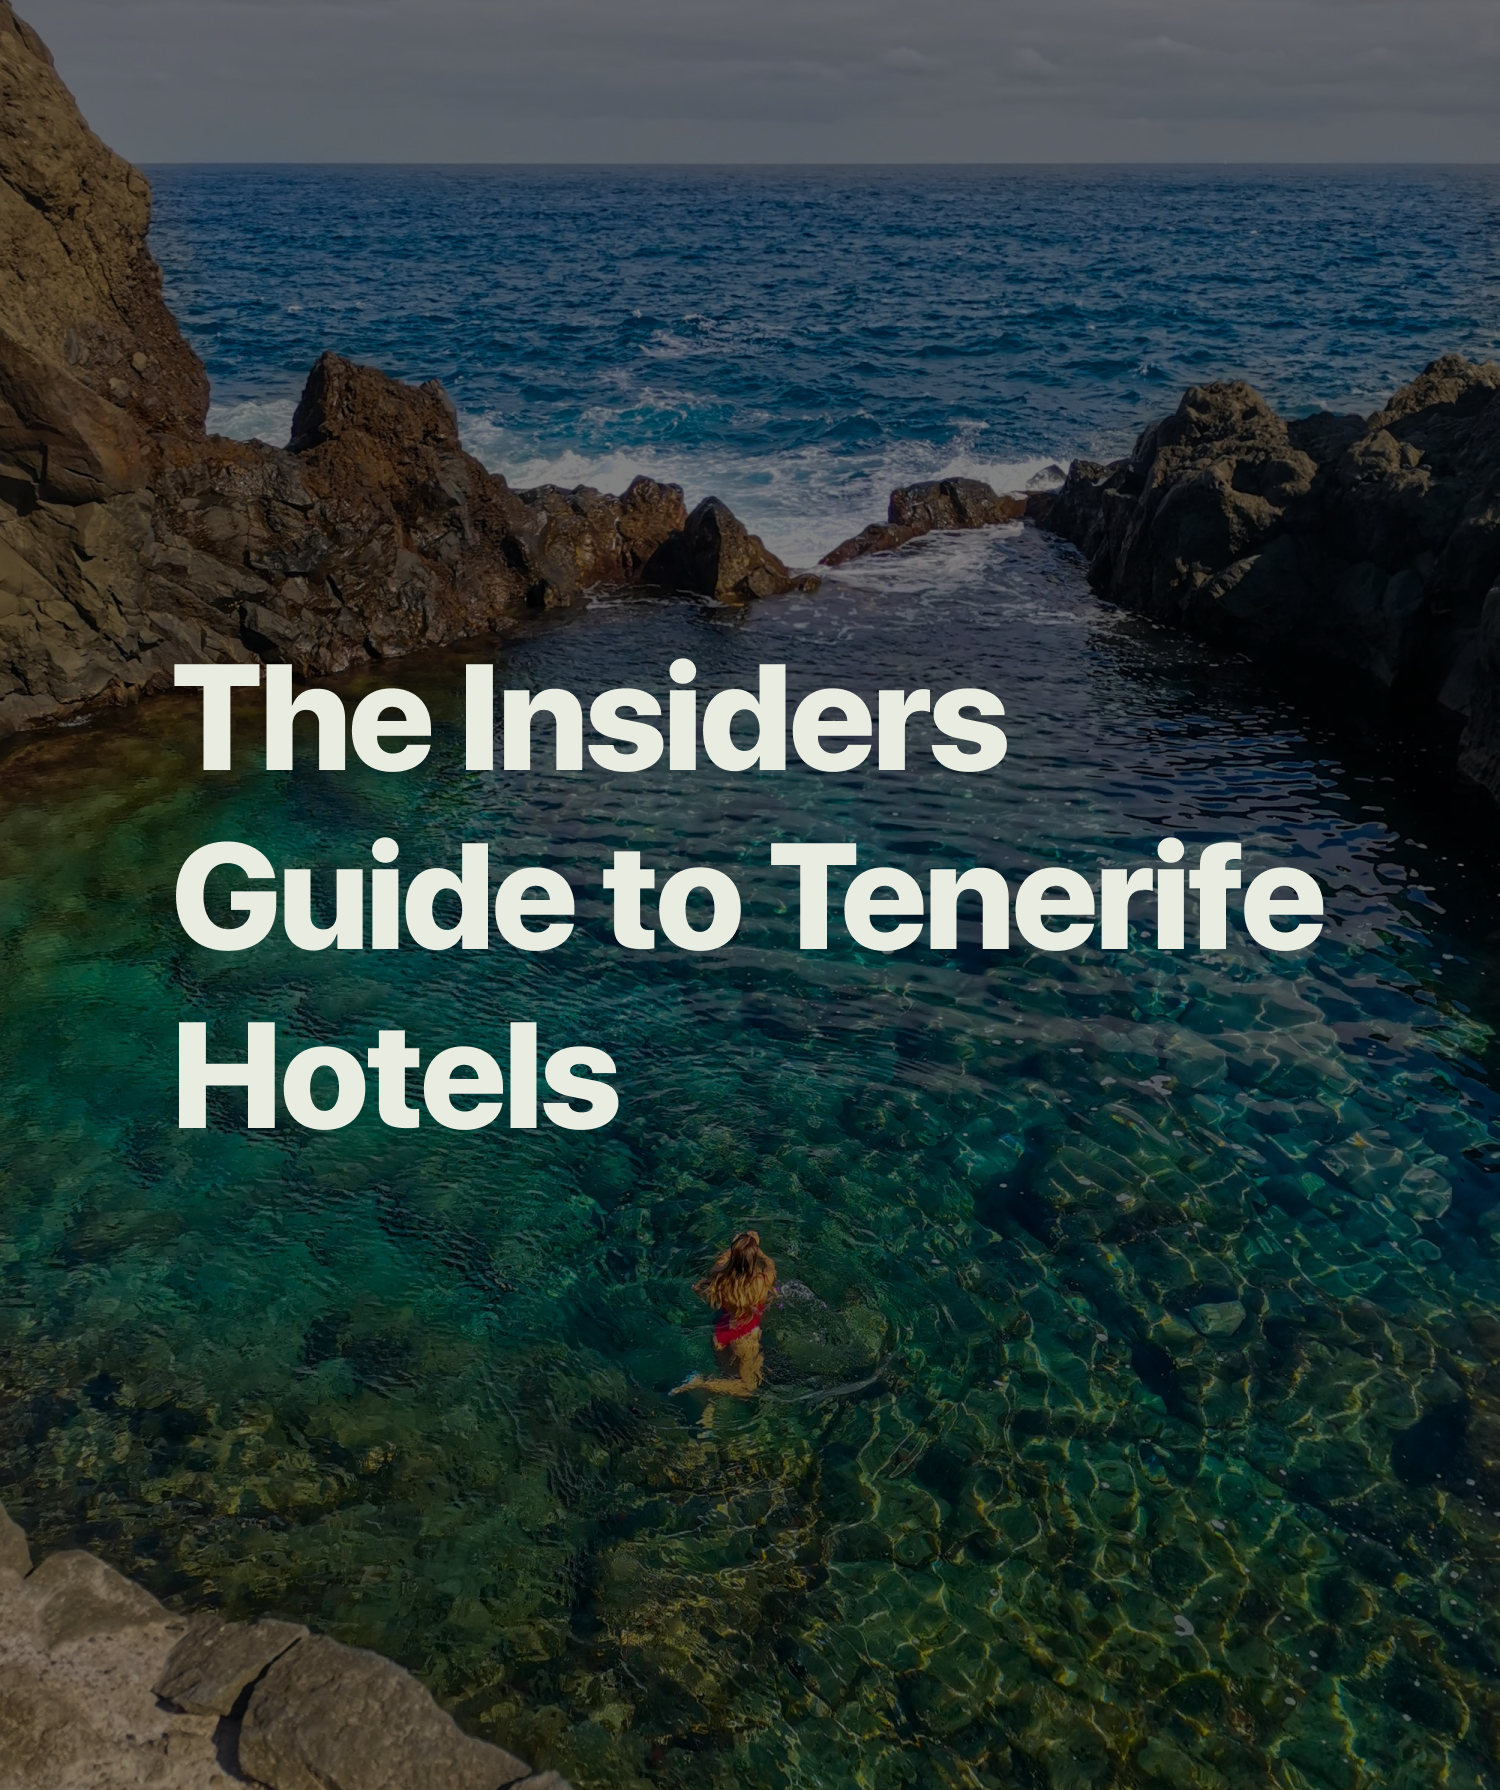 The Best Hotels in Tenerife